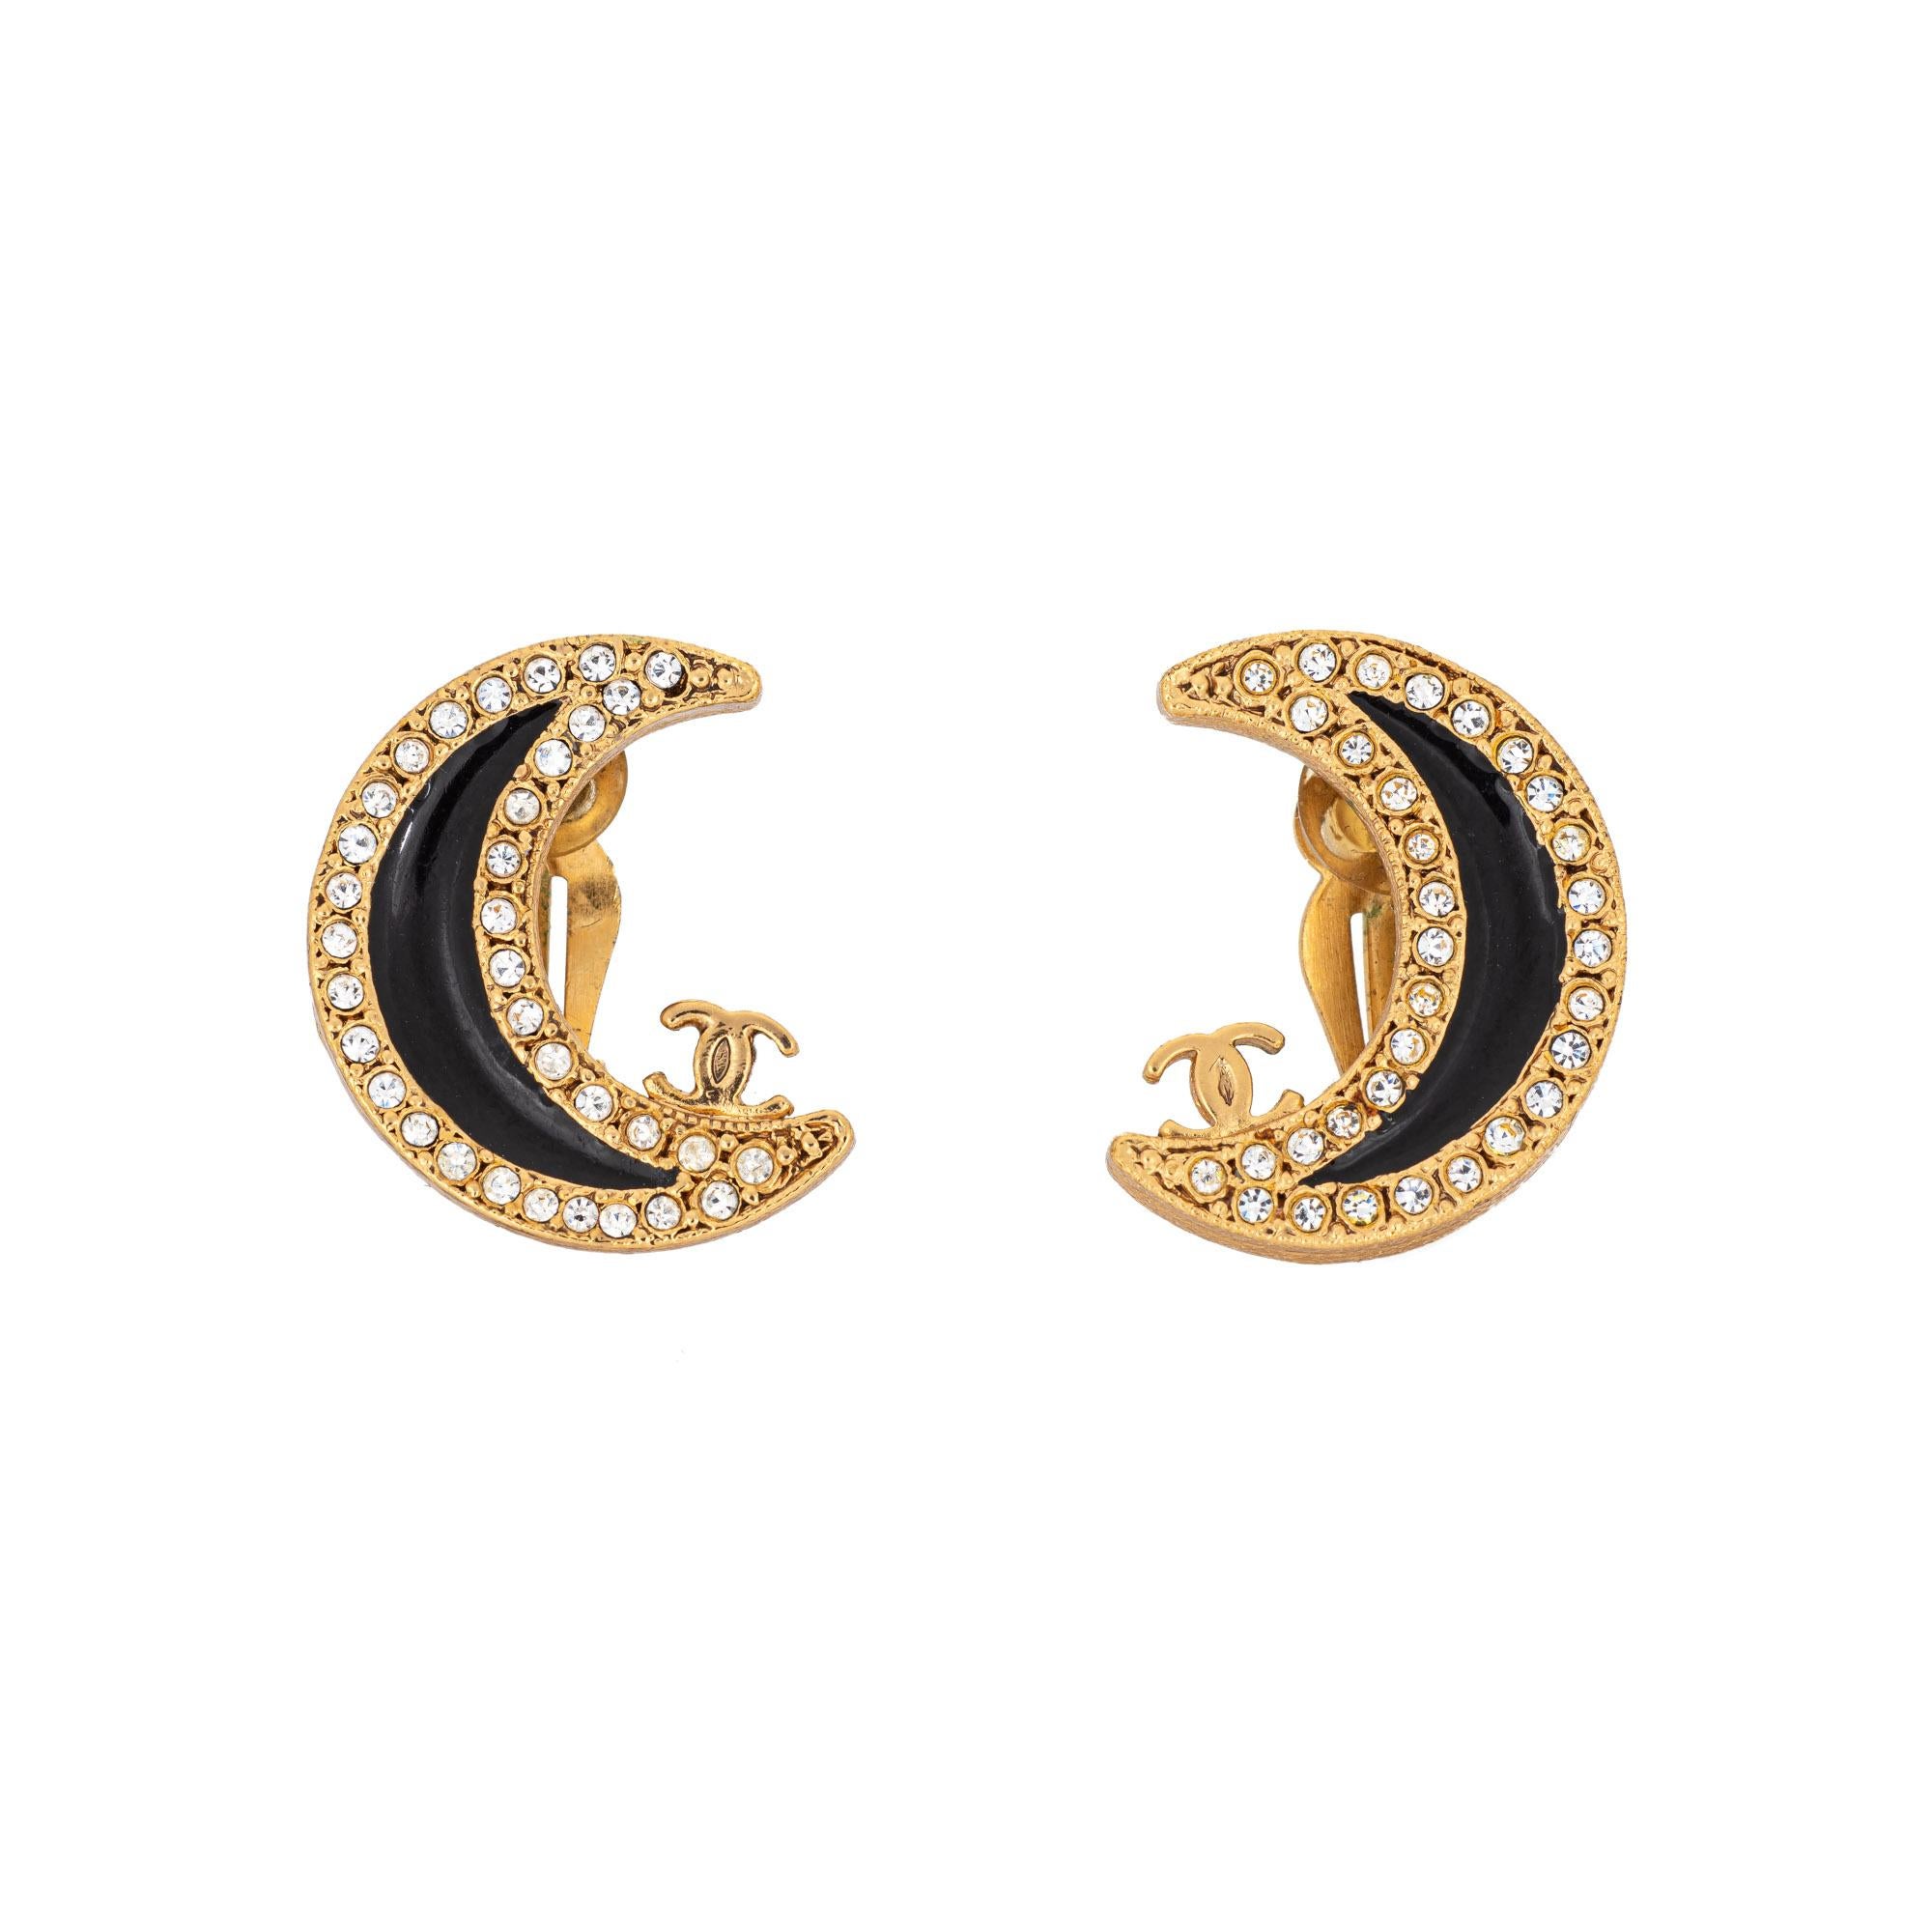 Modern 2001 Vintage Chanel Crescent Moon Earrings Crystal Clip On Yellow Gold Tone